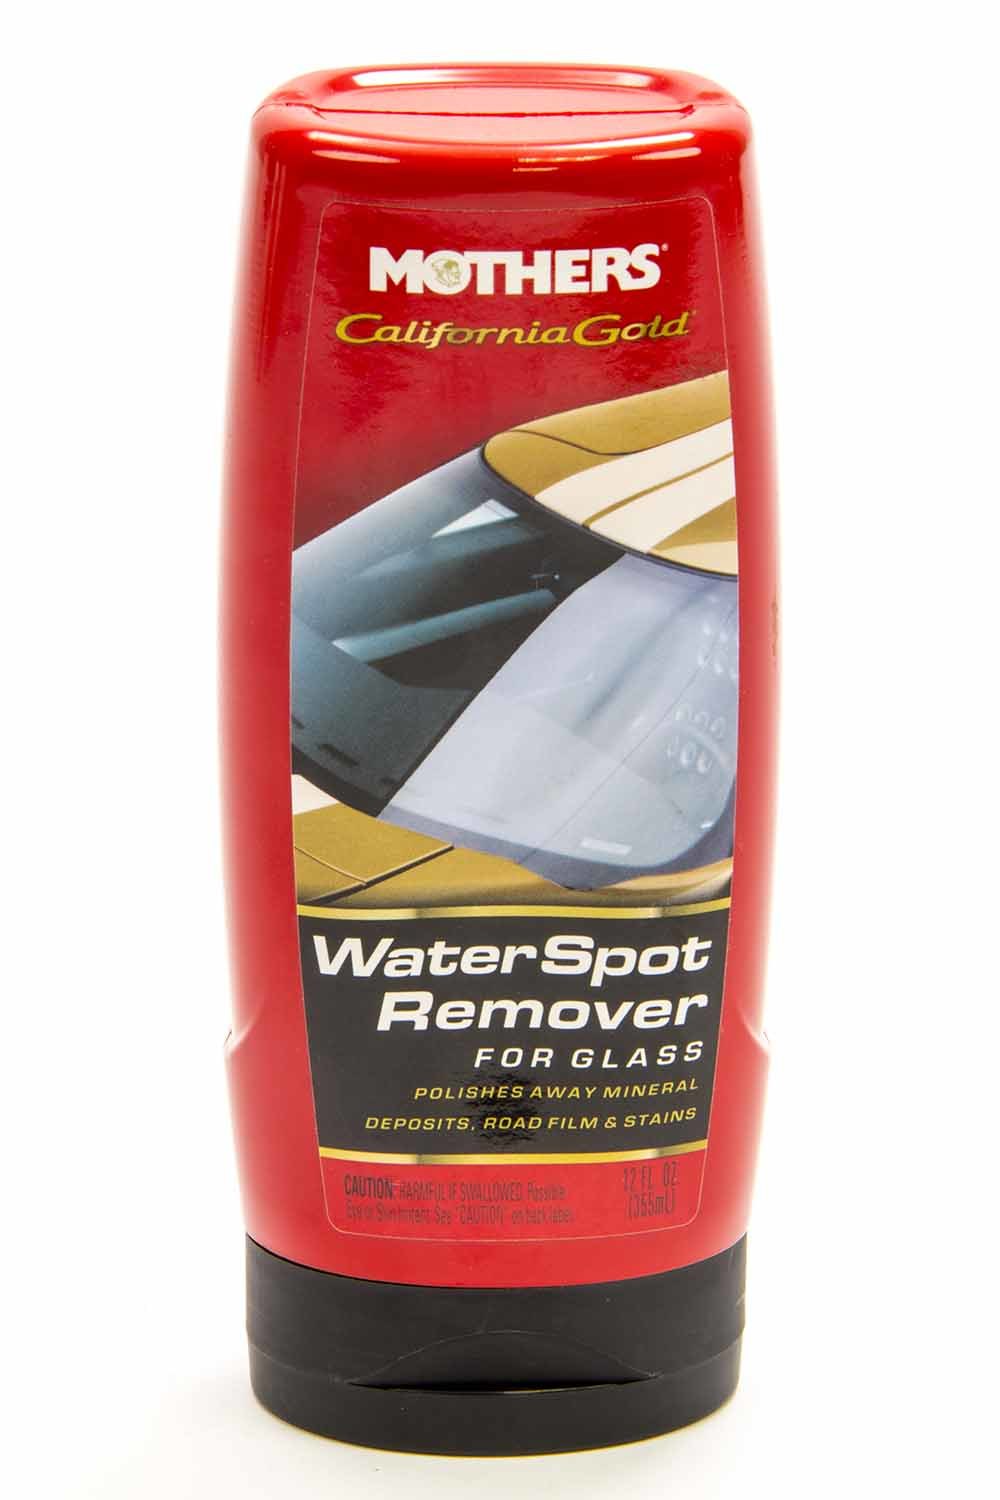 MOTHERS Water Spot Remover, California Gold, 12 oz Bottle, Each